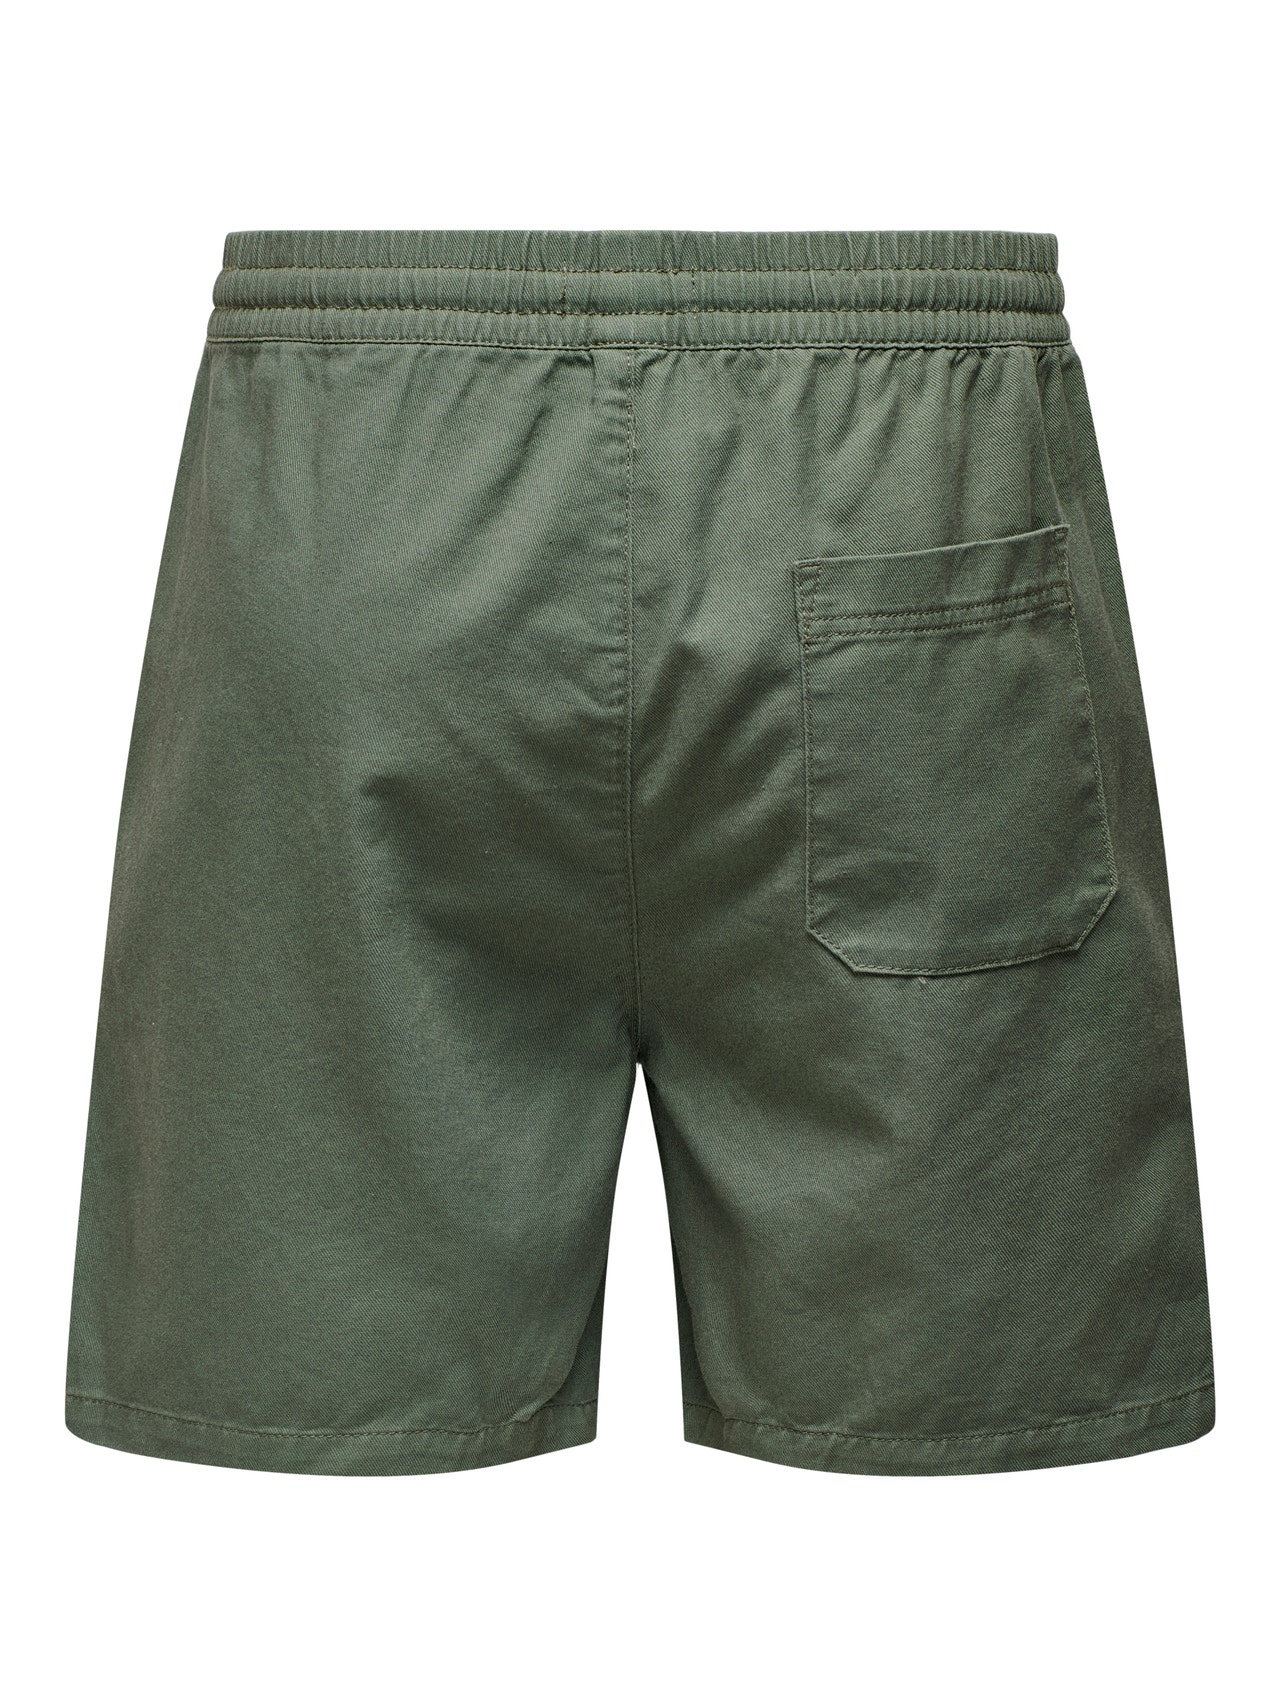 ONLY & SONS Regular Fit Mid rise Shorts -Laurel Wreath - 22025790